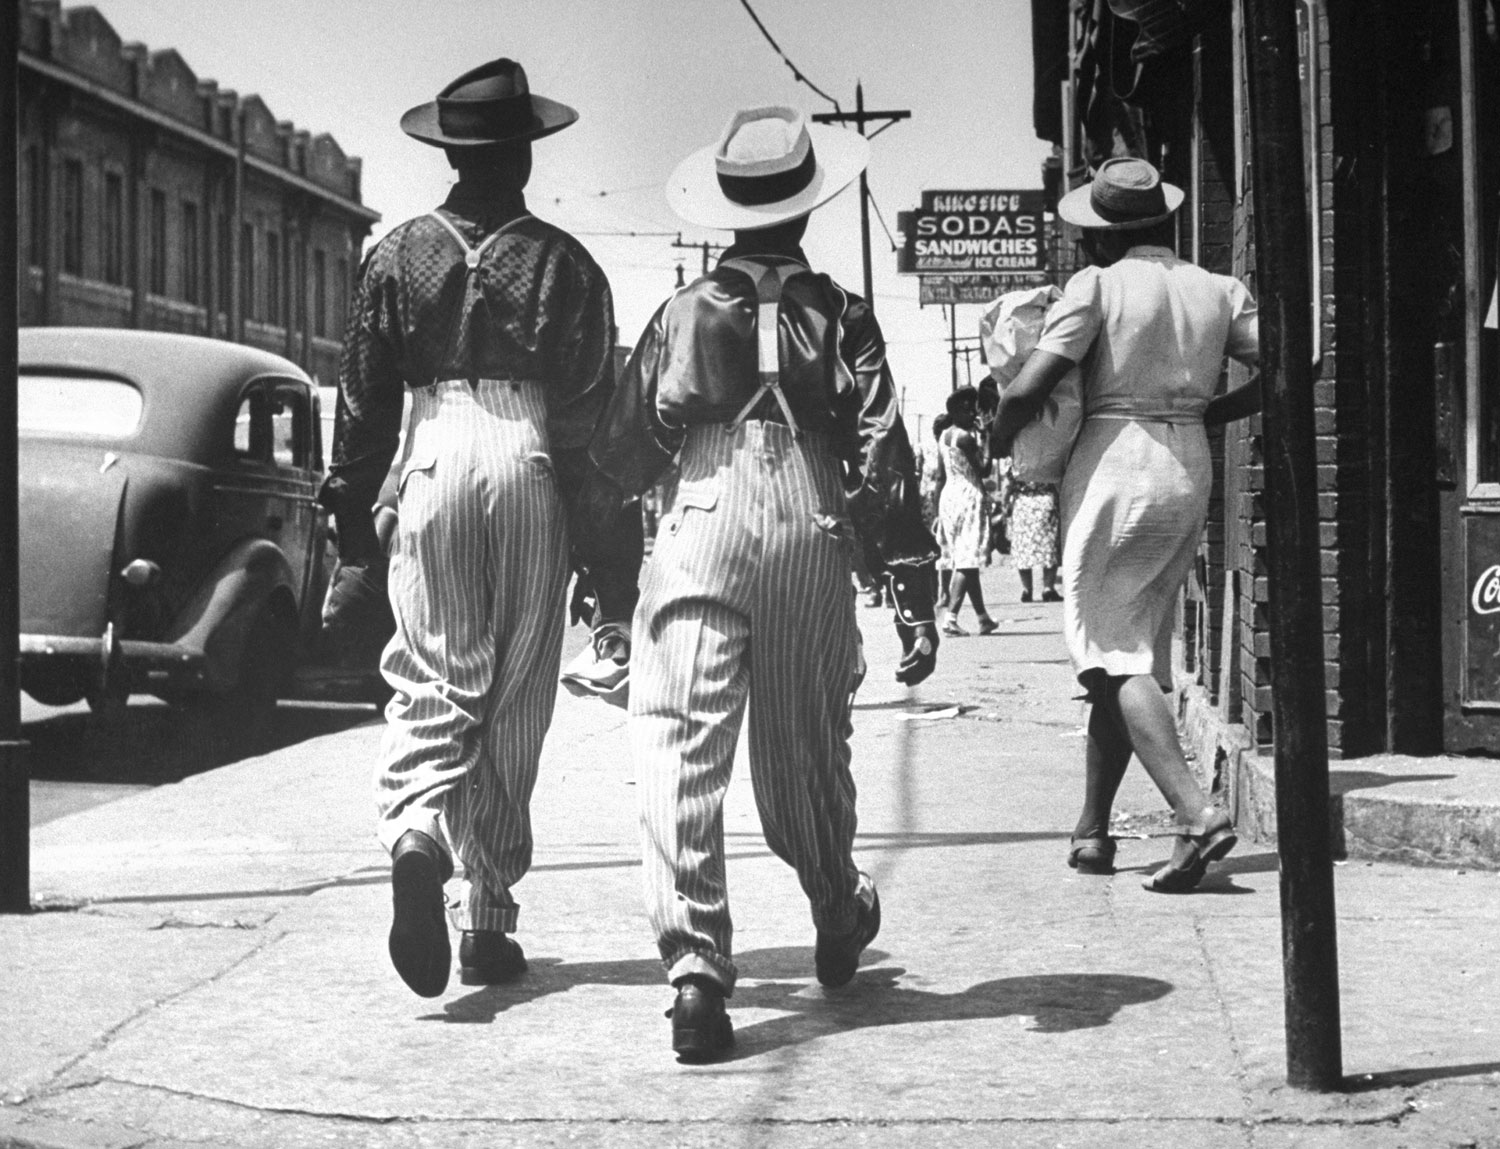 Not published in LIFE. A pair of zoot suit-wearing African American men walk down a Detroit street after wartime race riots between blacks and whites were quelled by Army troops and martial law, June 1943.